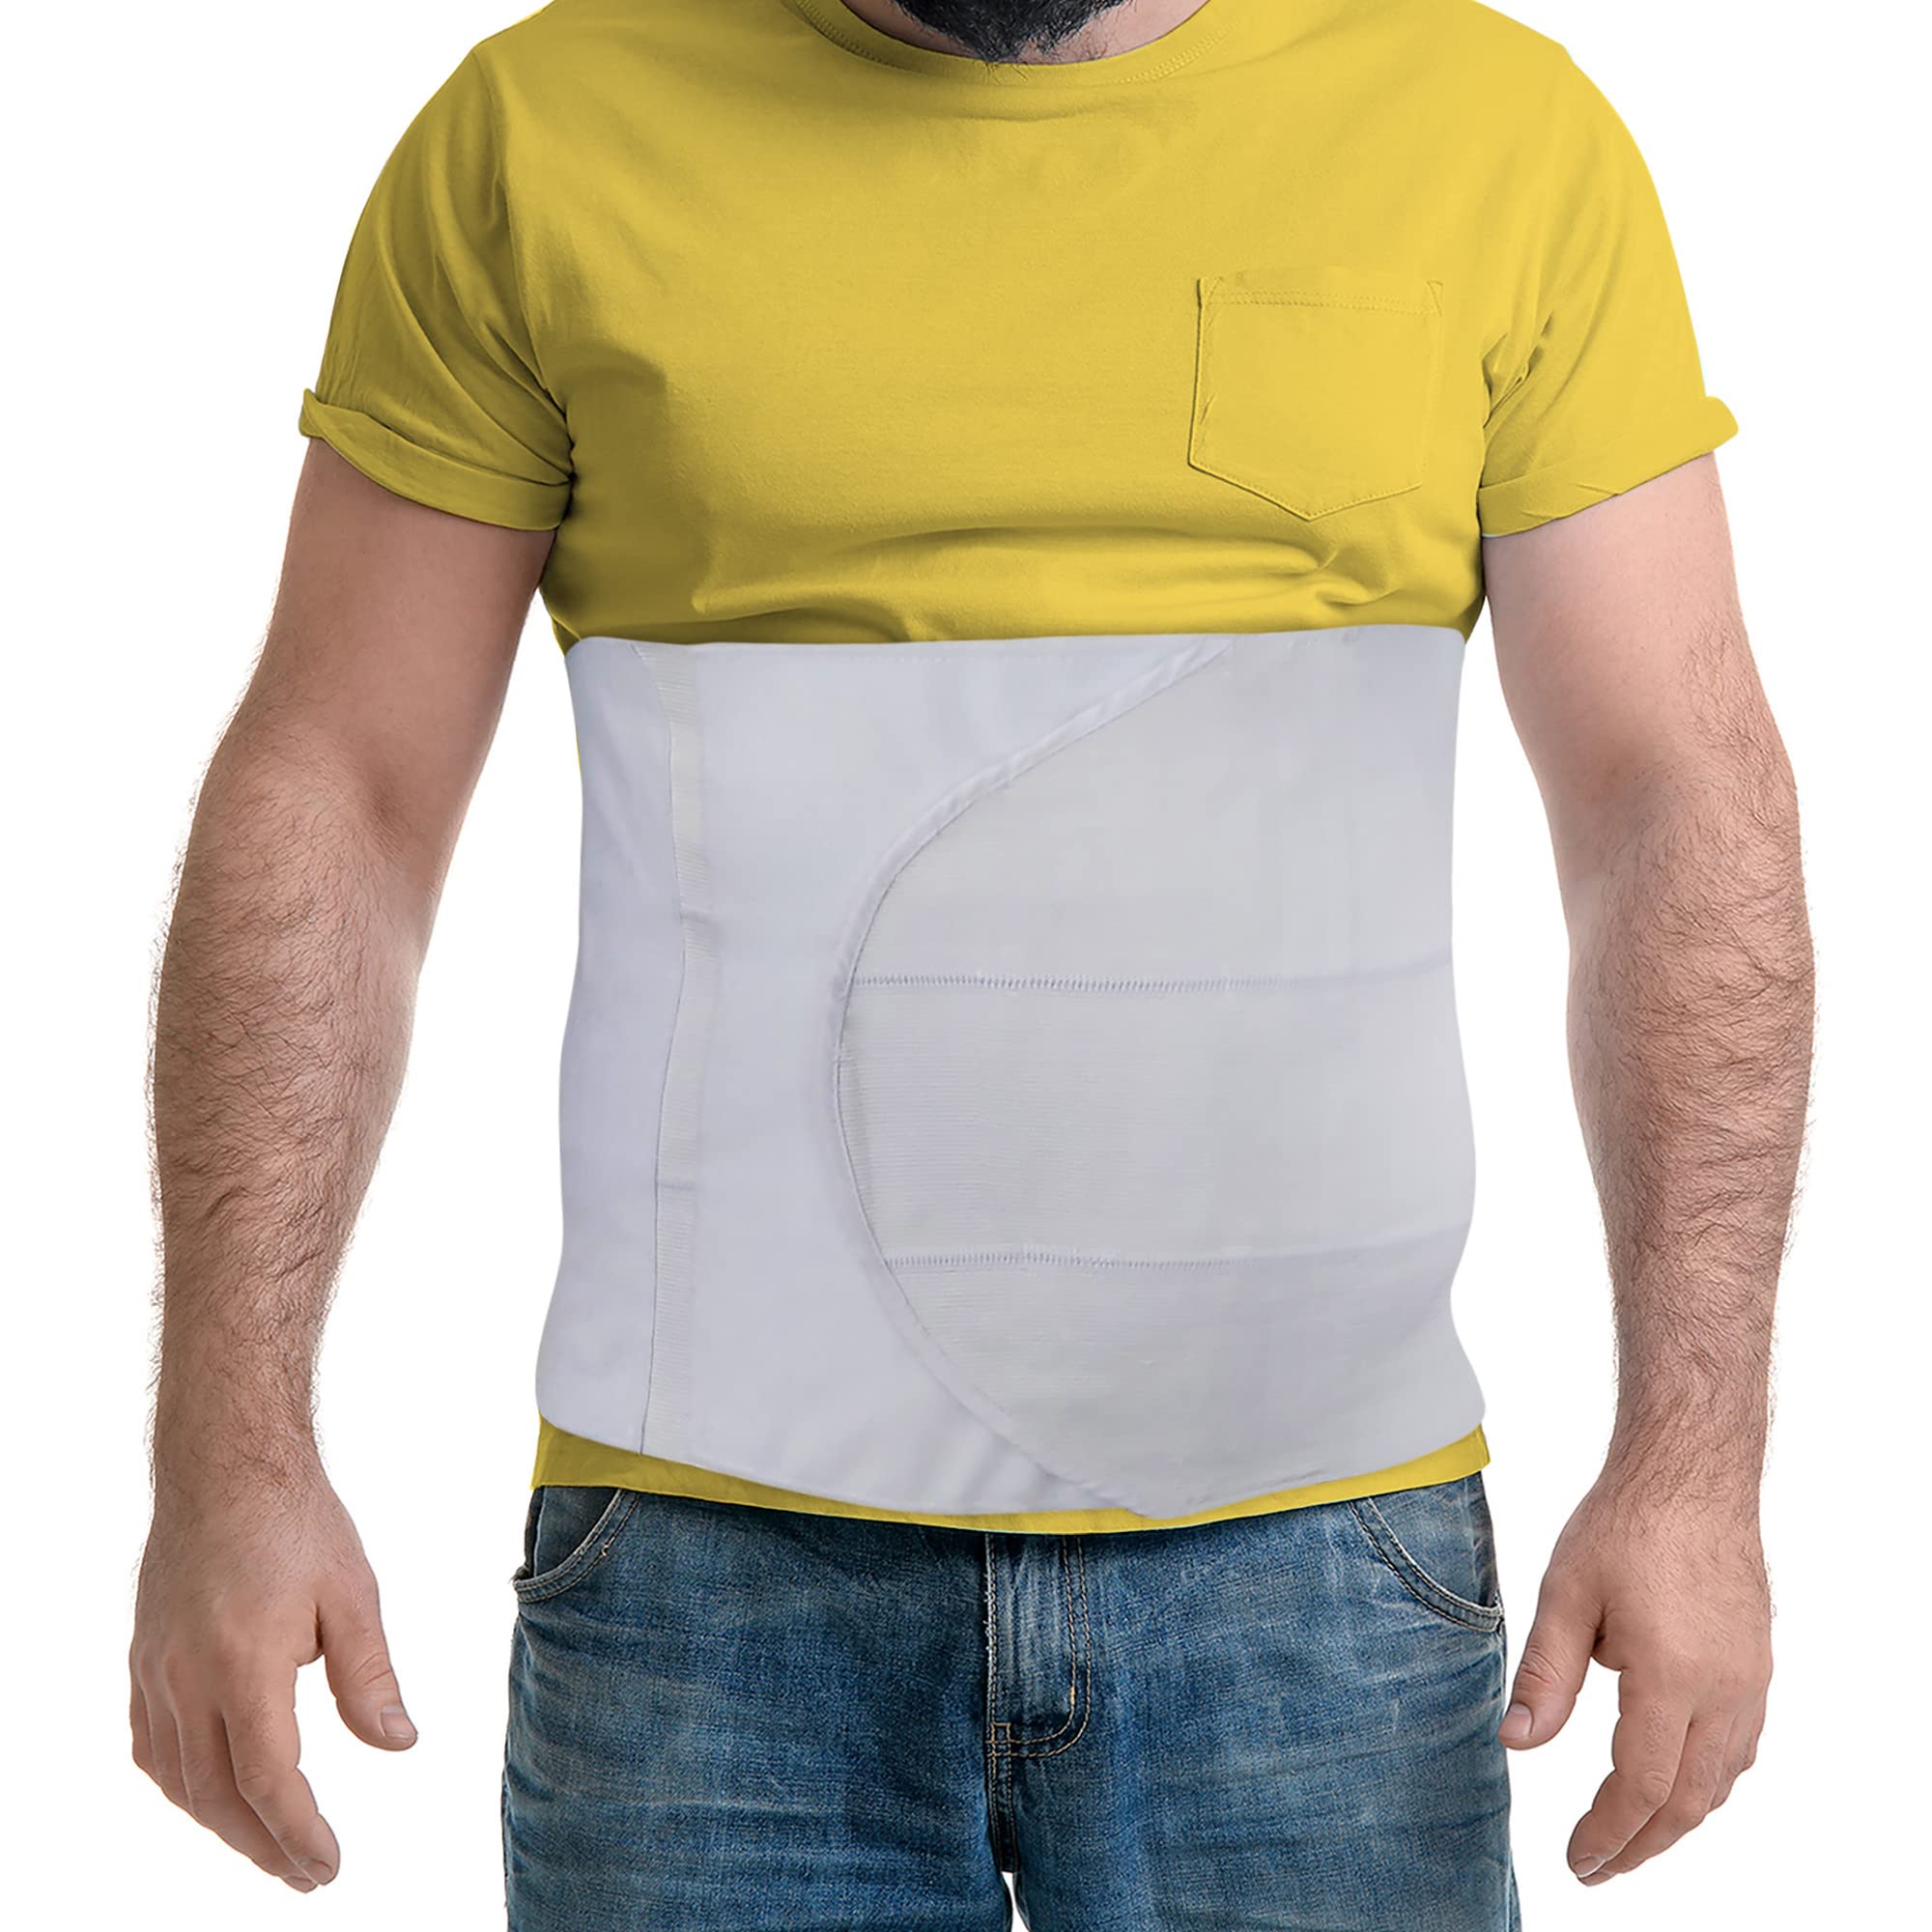 Plus Size Bariatric Abdominal Binder | Belly Band, Stomach Hernia Brace &  Back Support Belt (up to 4XL)